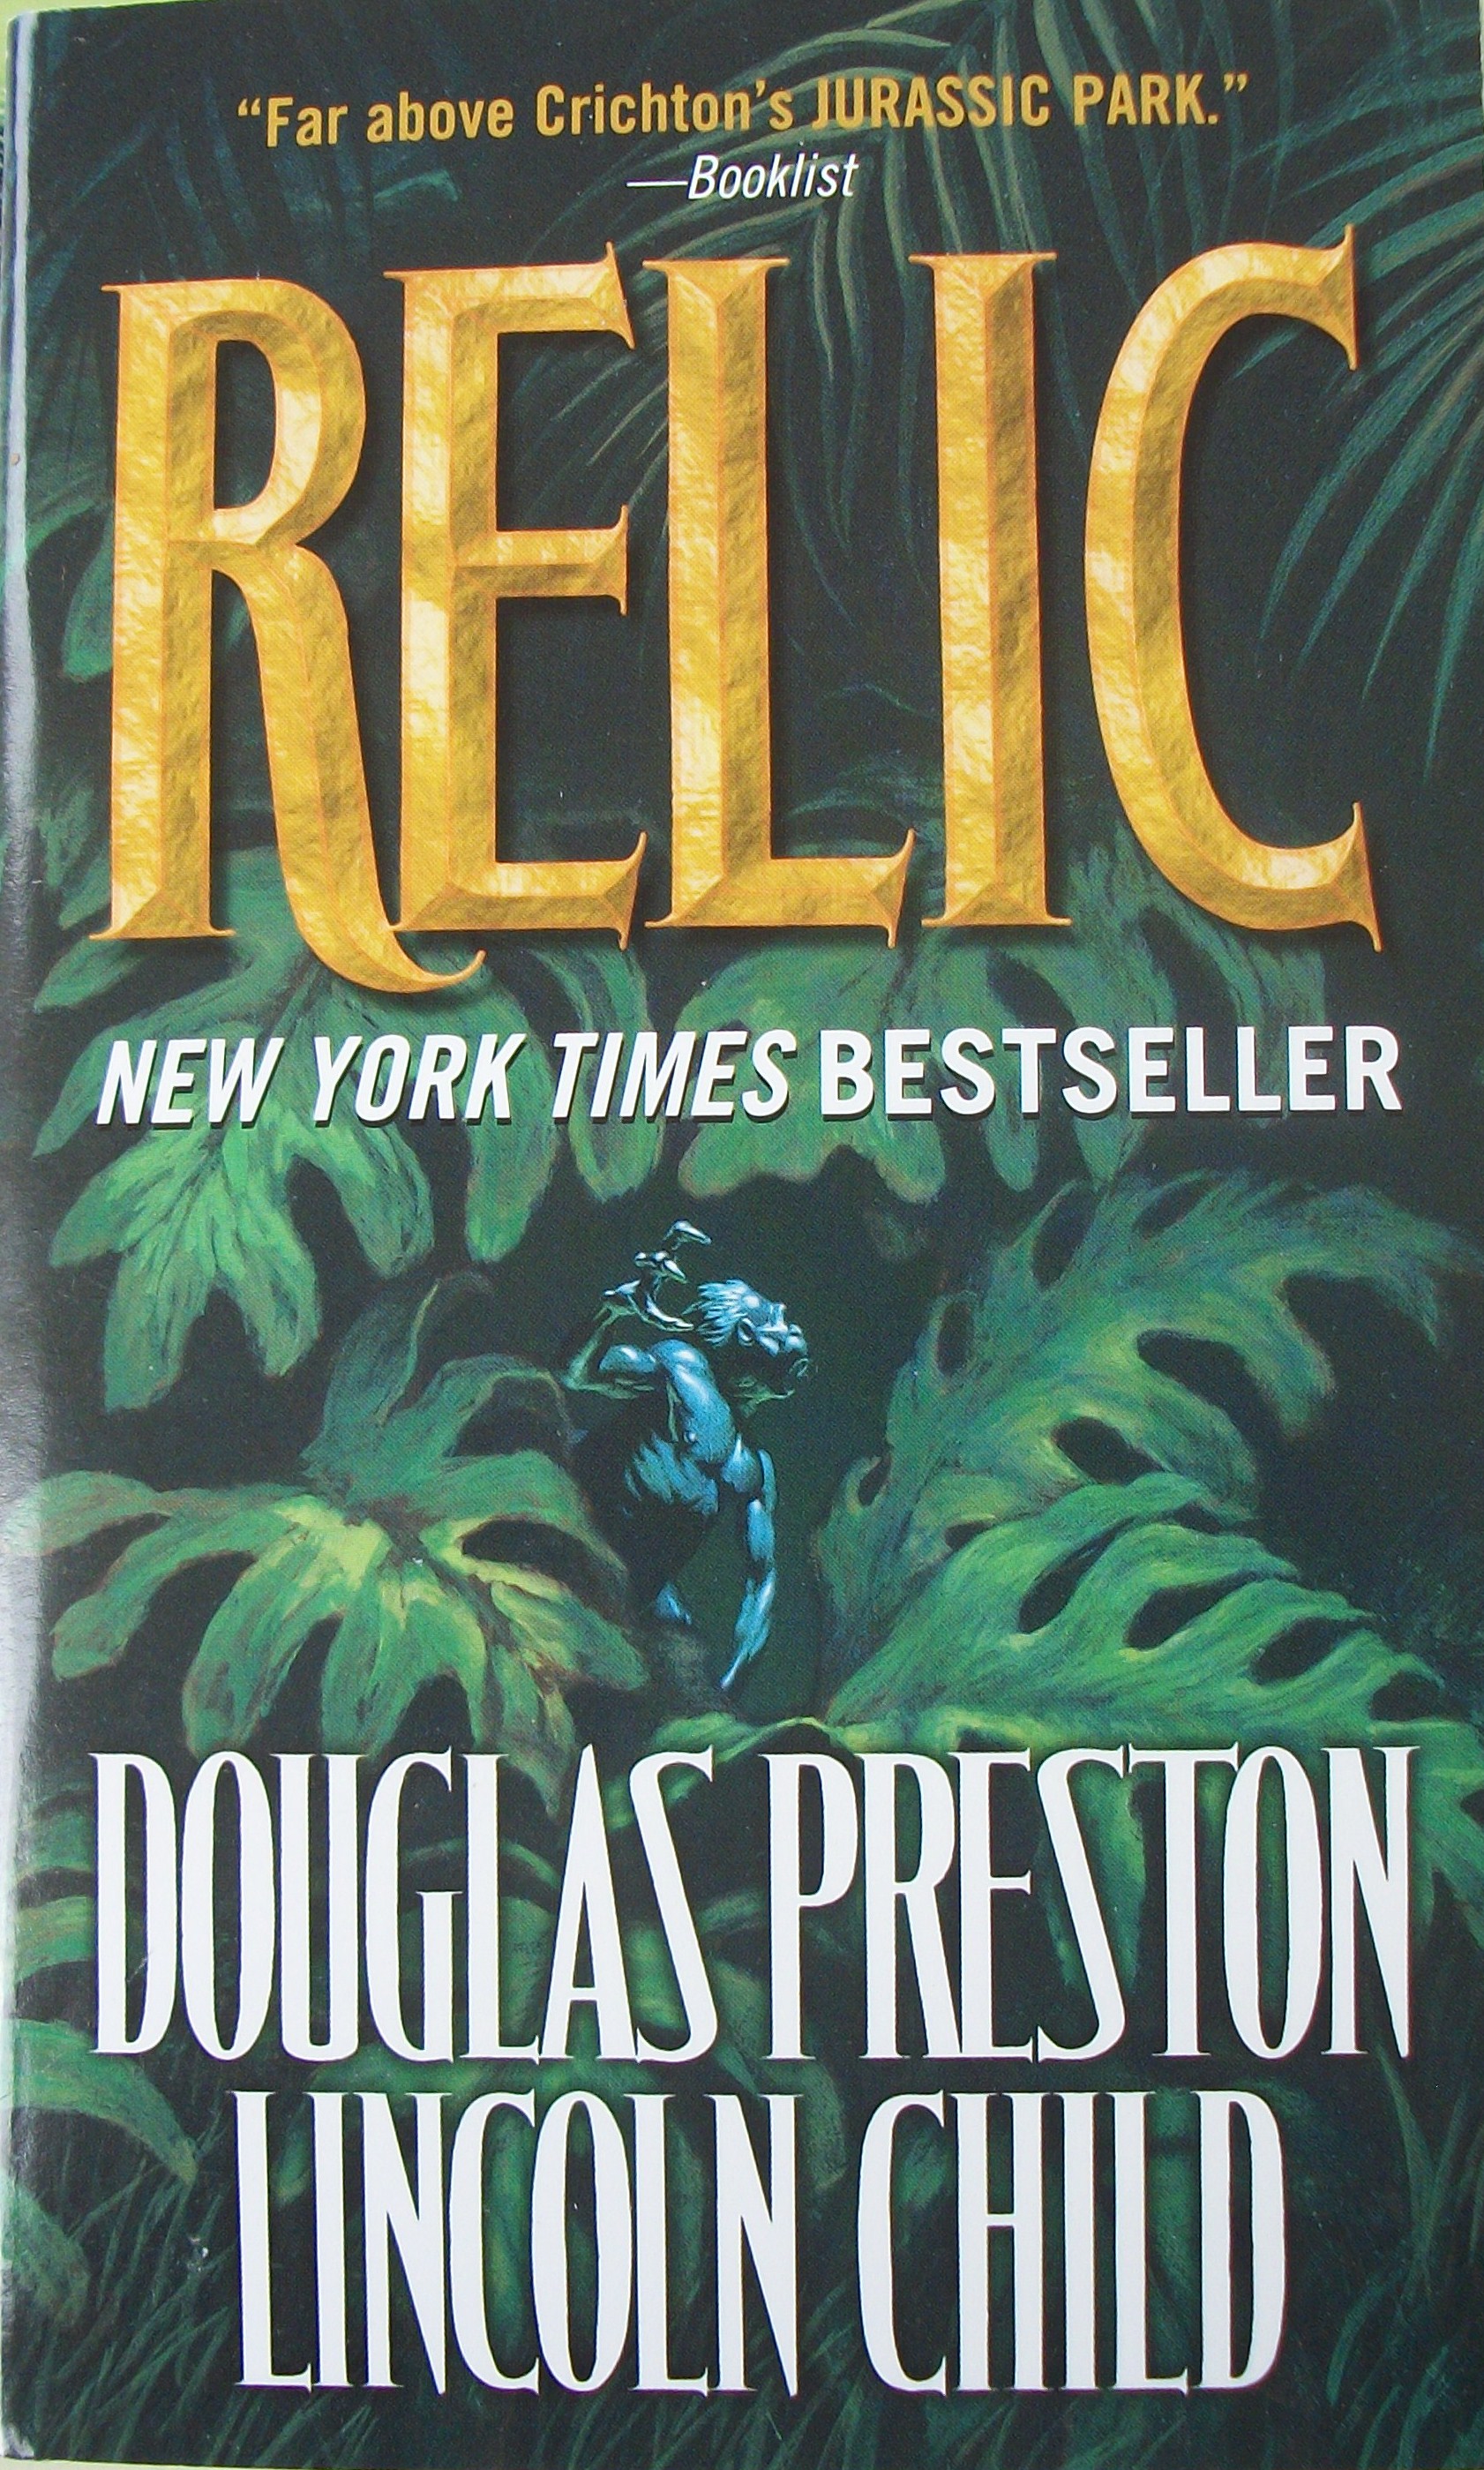 Six Questions with Douglas Preston: New York Times Best-selling Author